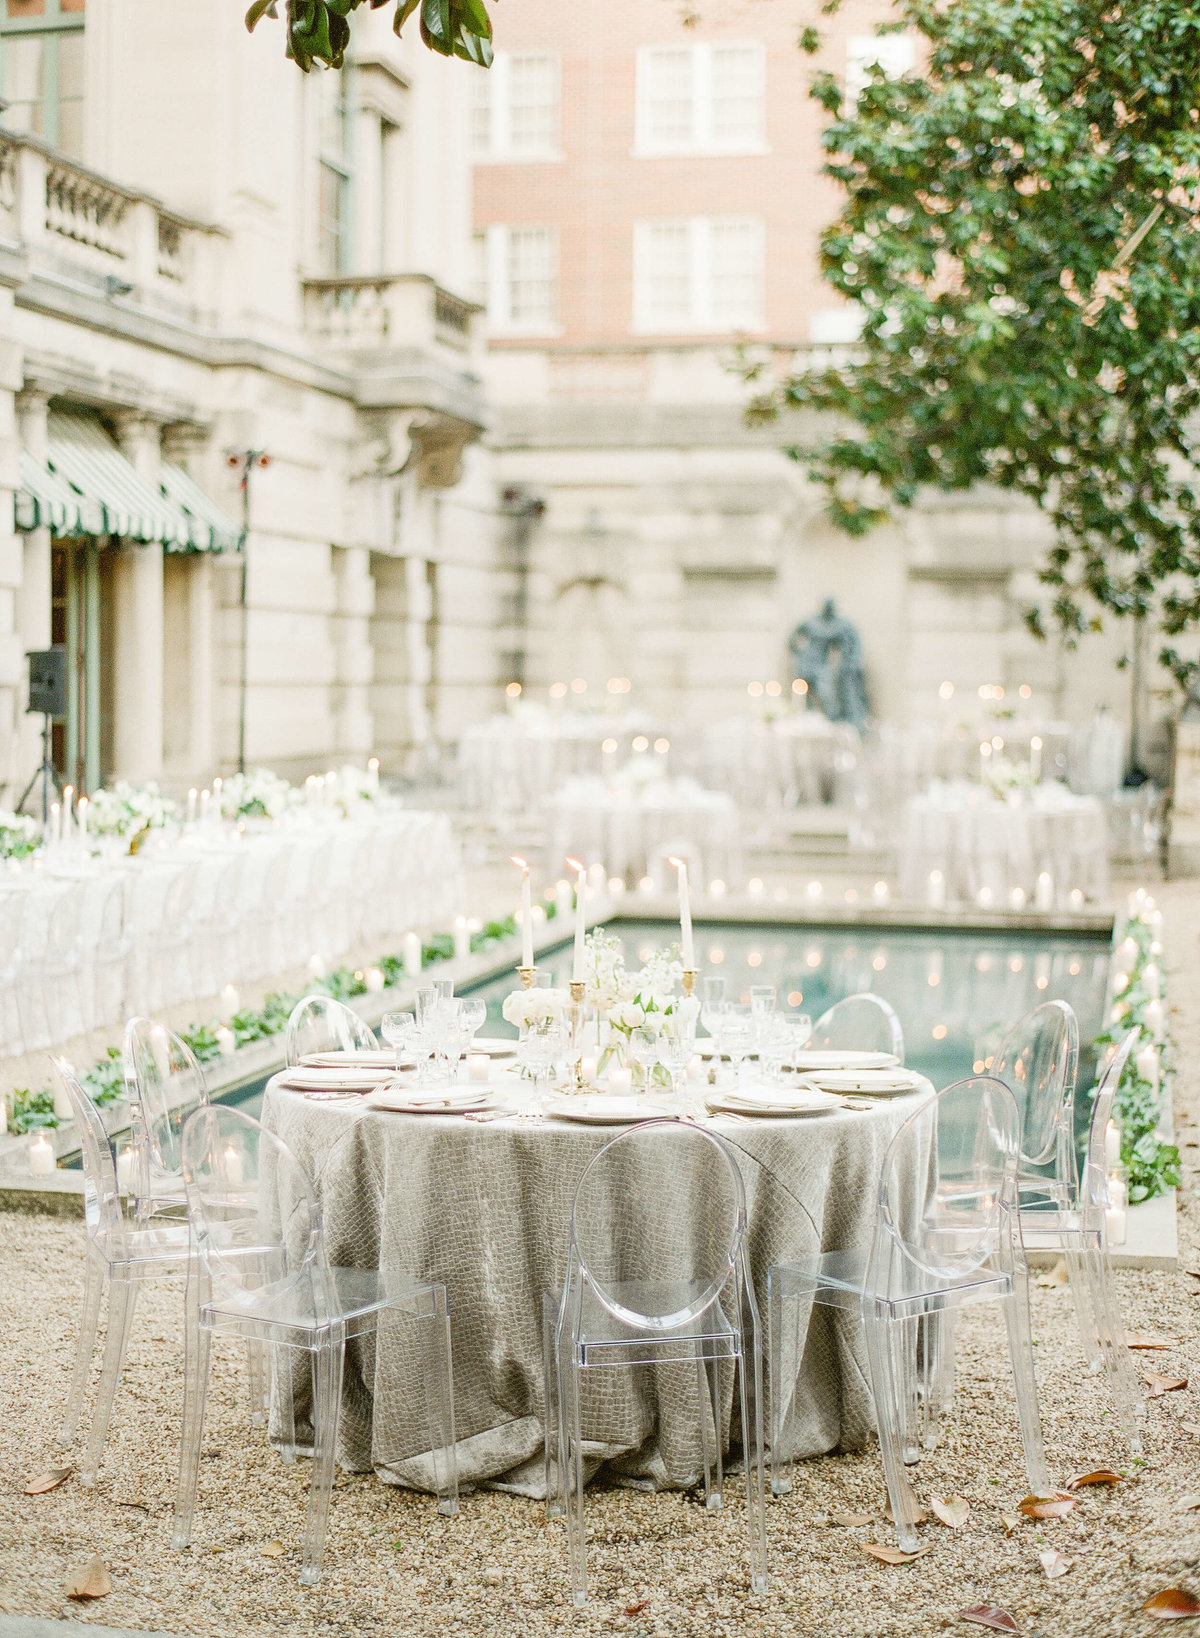 56-KTMerry-weddings-outdoor-reception-dining